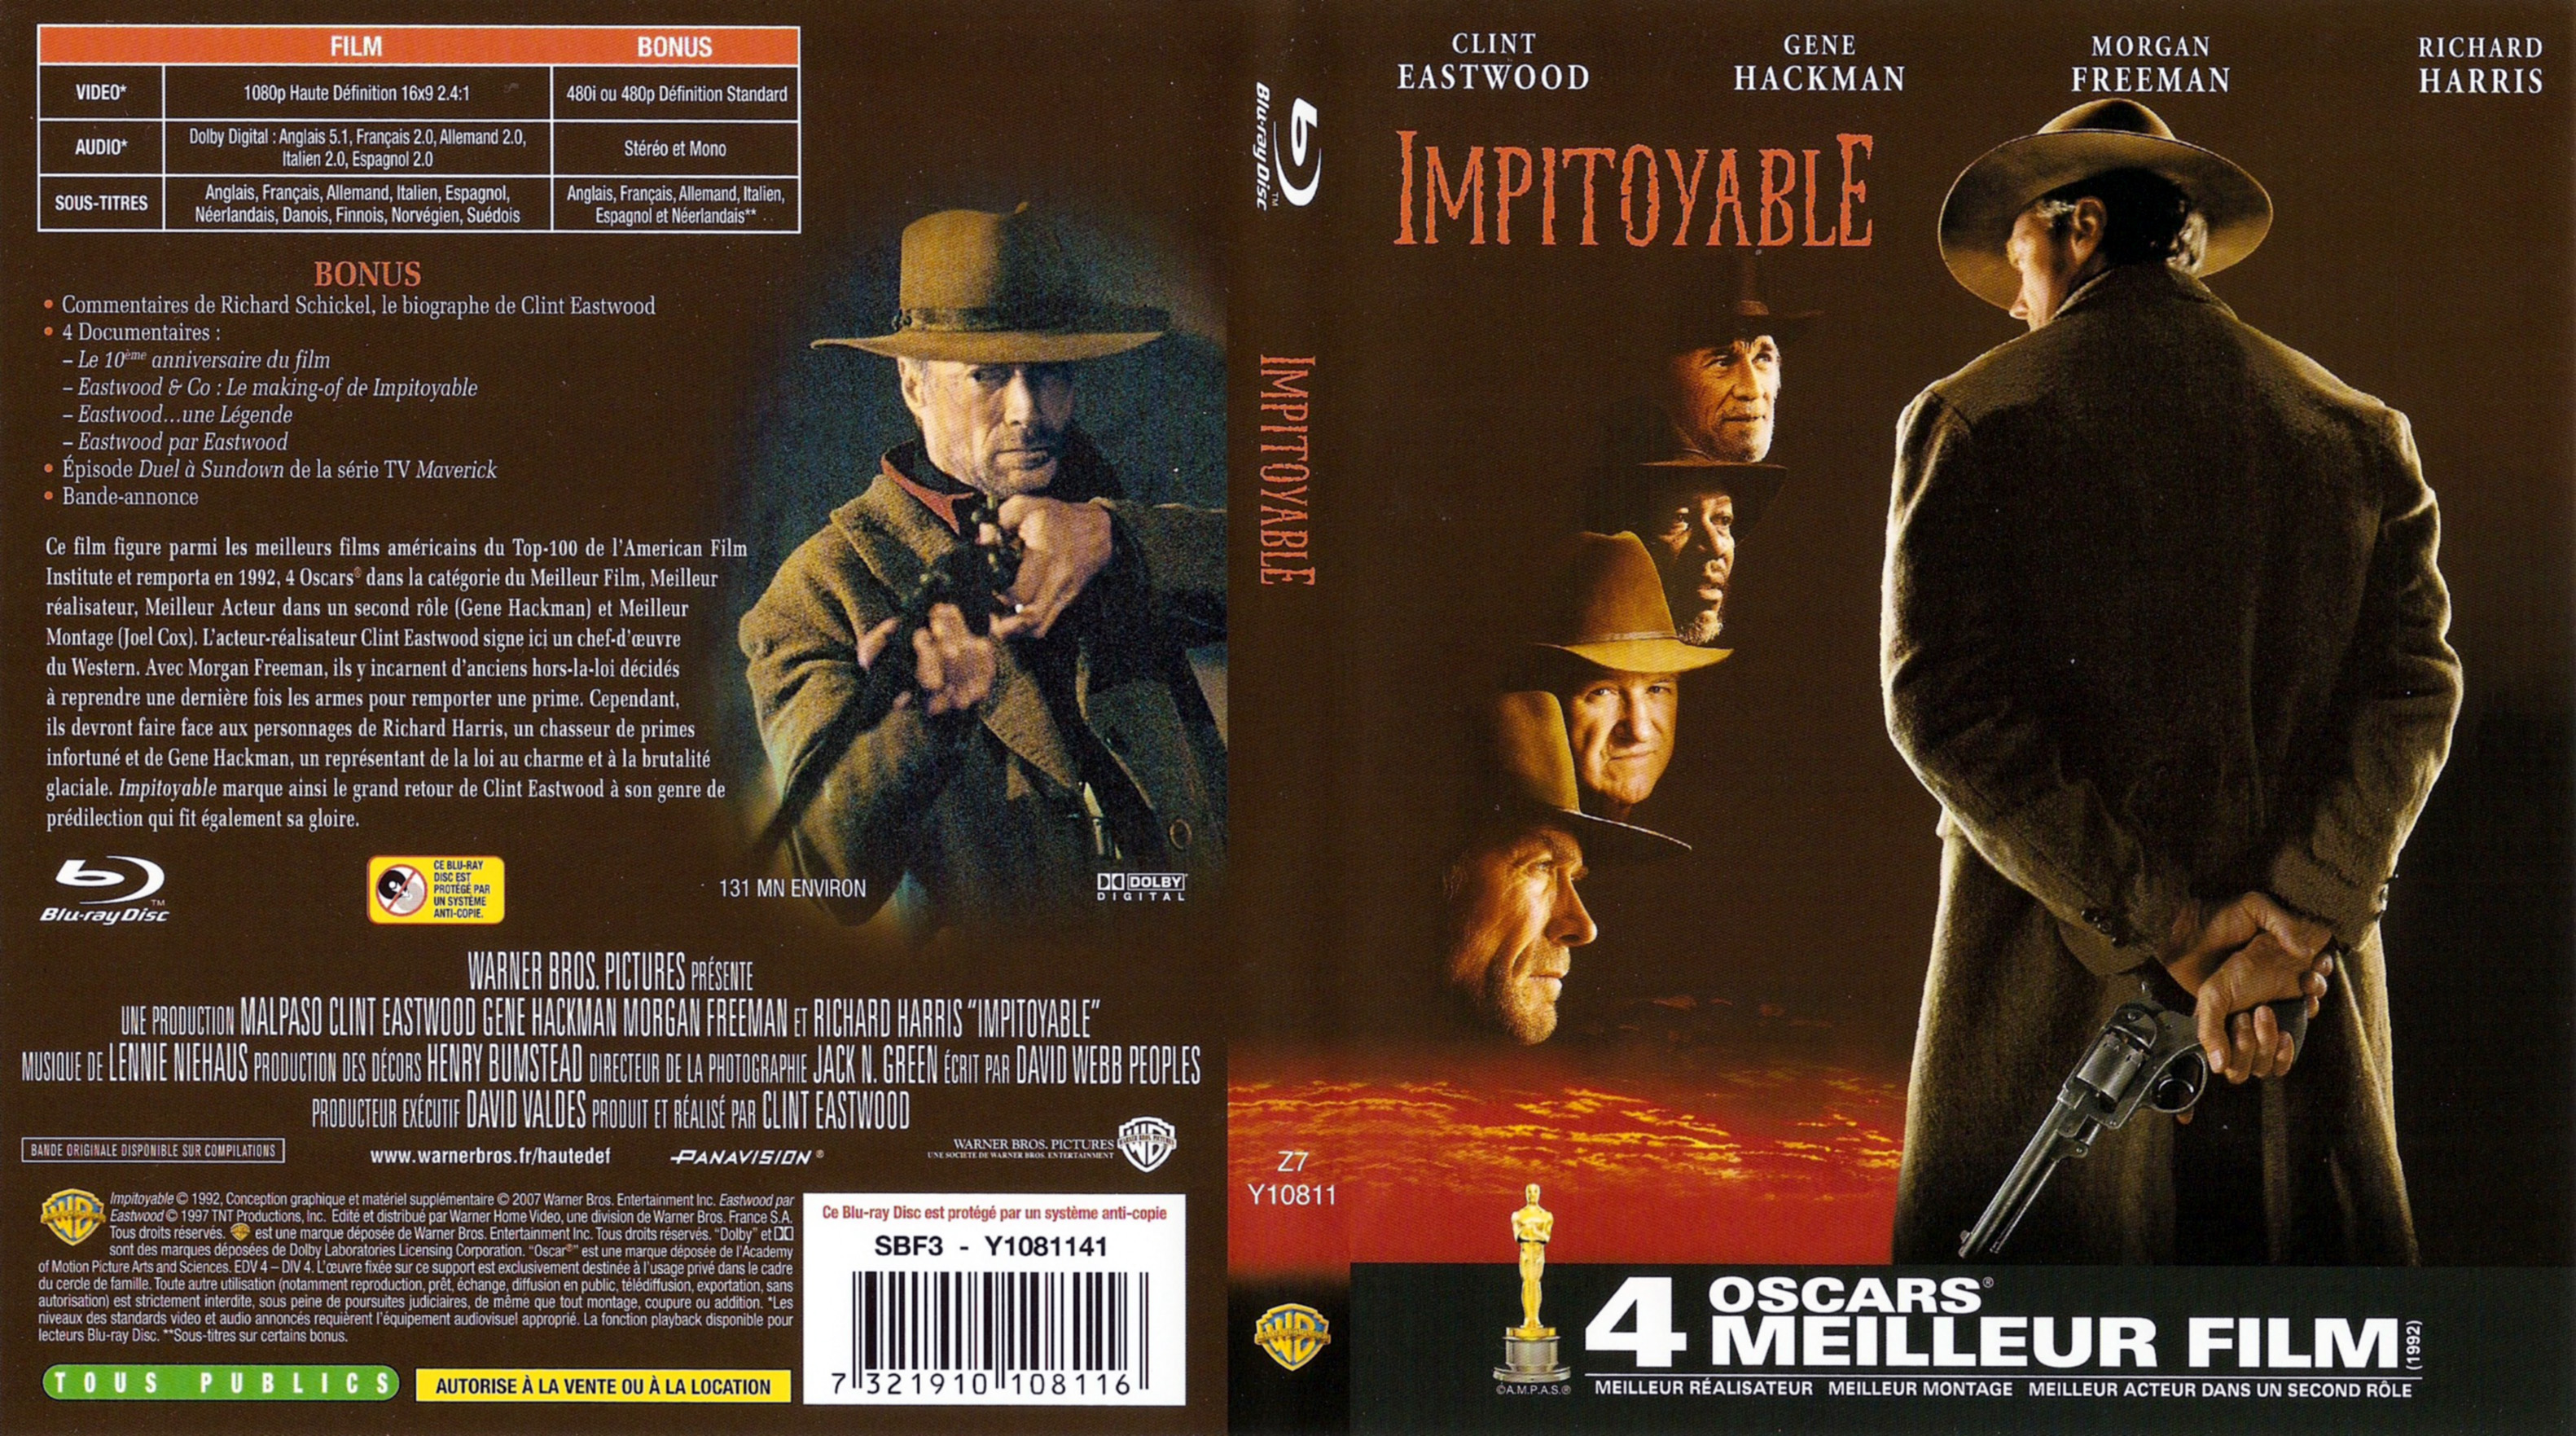 Jaquette DVD Impitoyable (BLU-RAY)